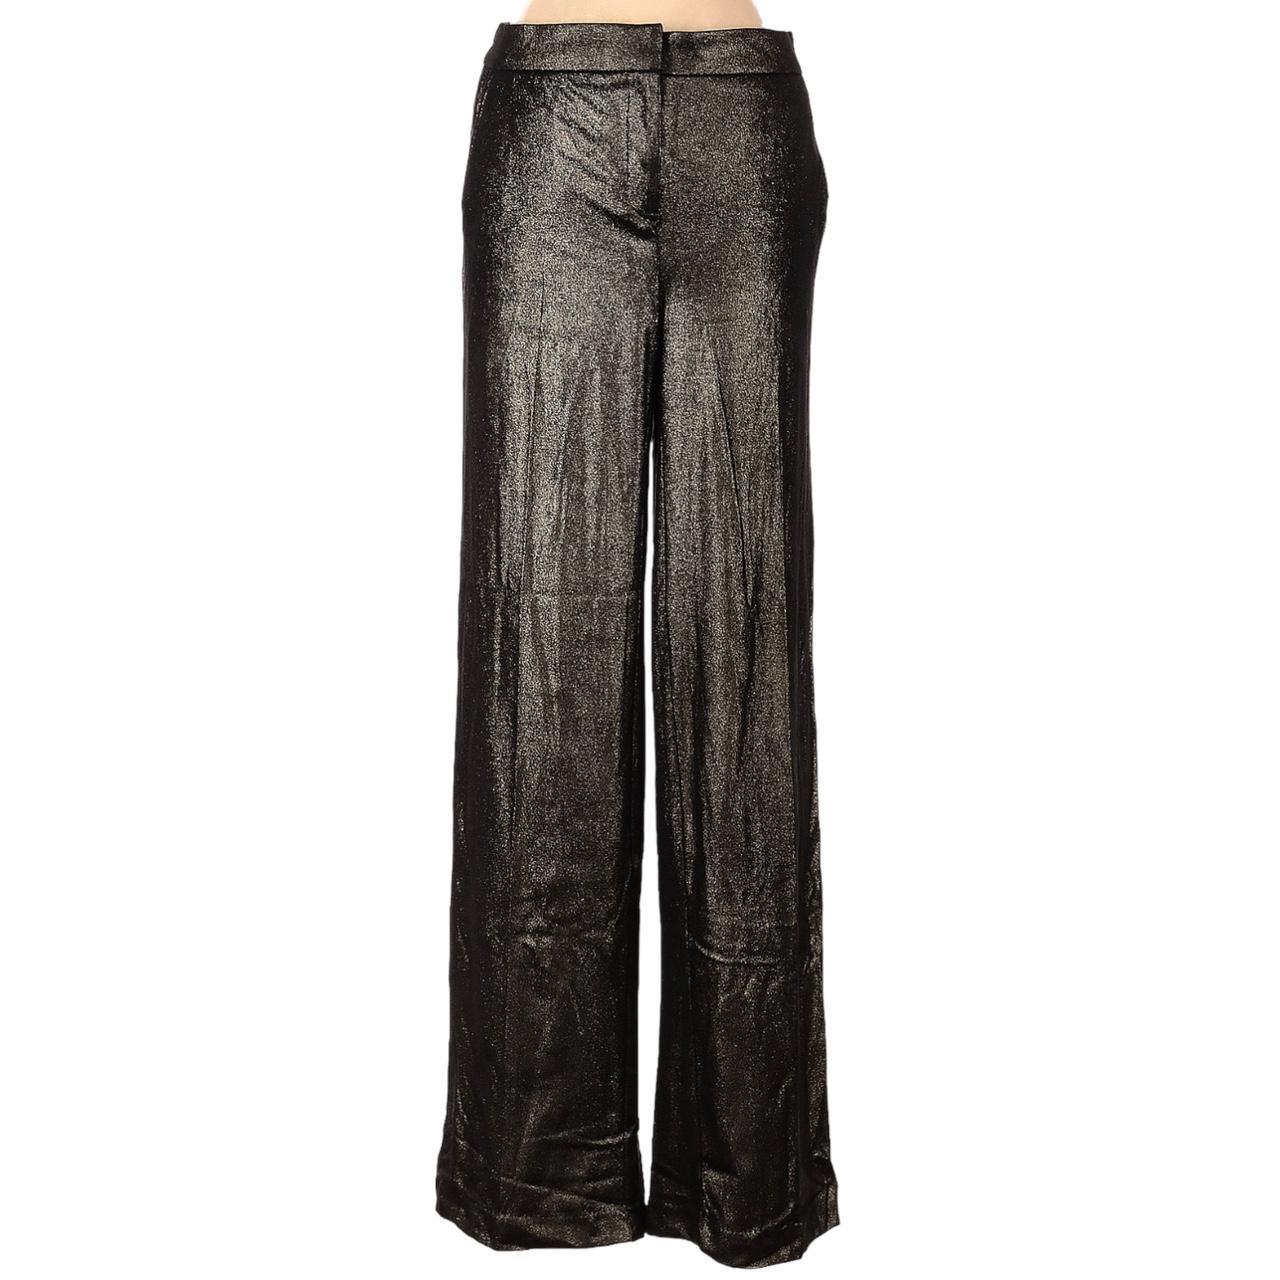 Joie Women's Black and Gold Trousers